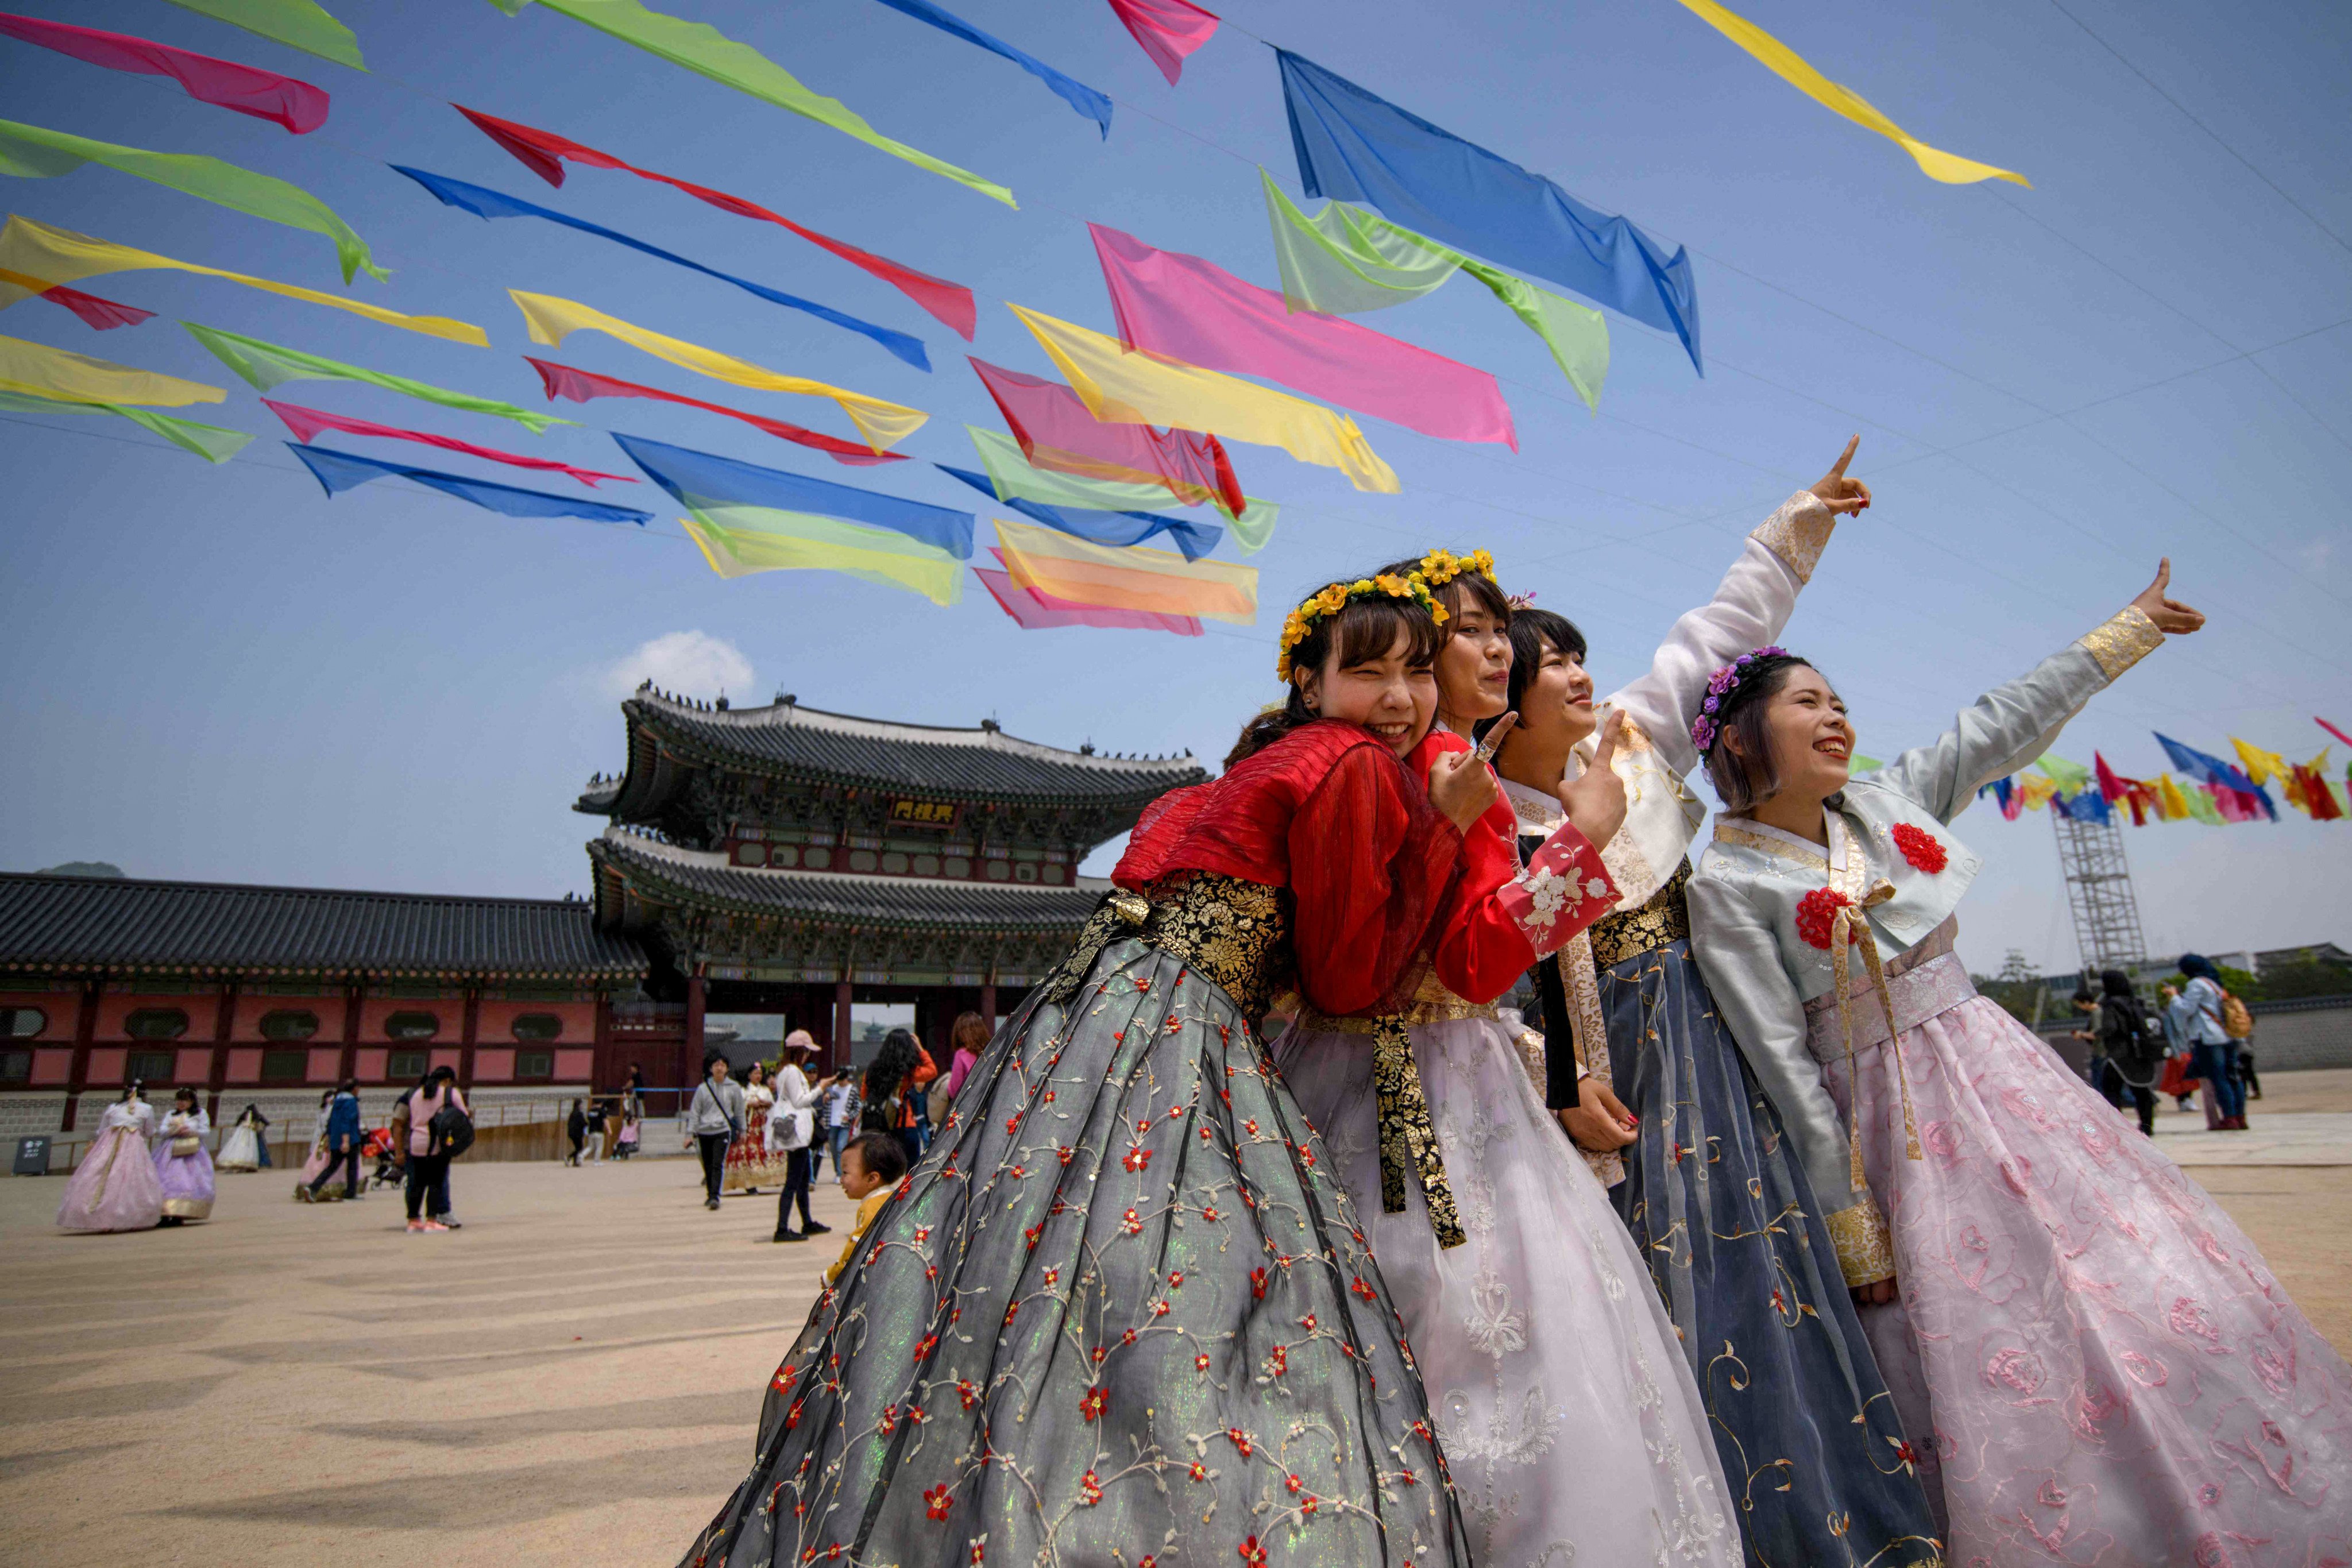 A group of tourists from China pose for photos at Gyeongbokgung Palace in Seoul. Photo: AFP